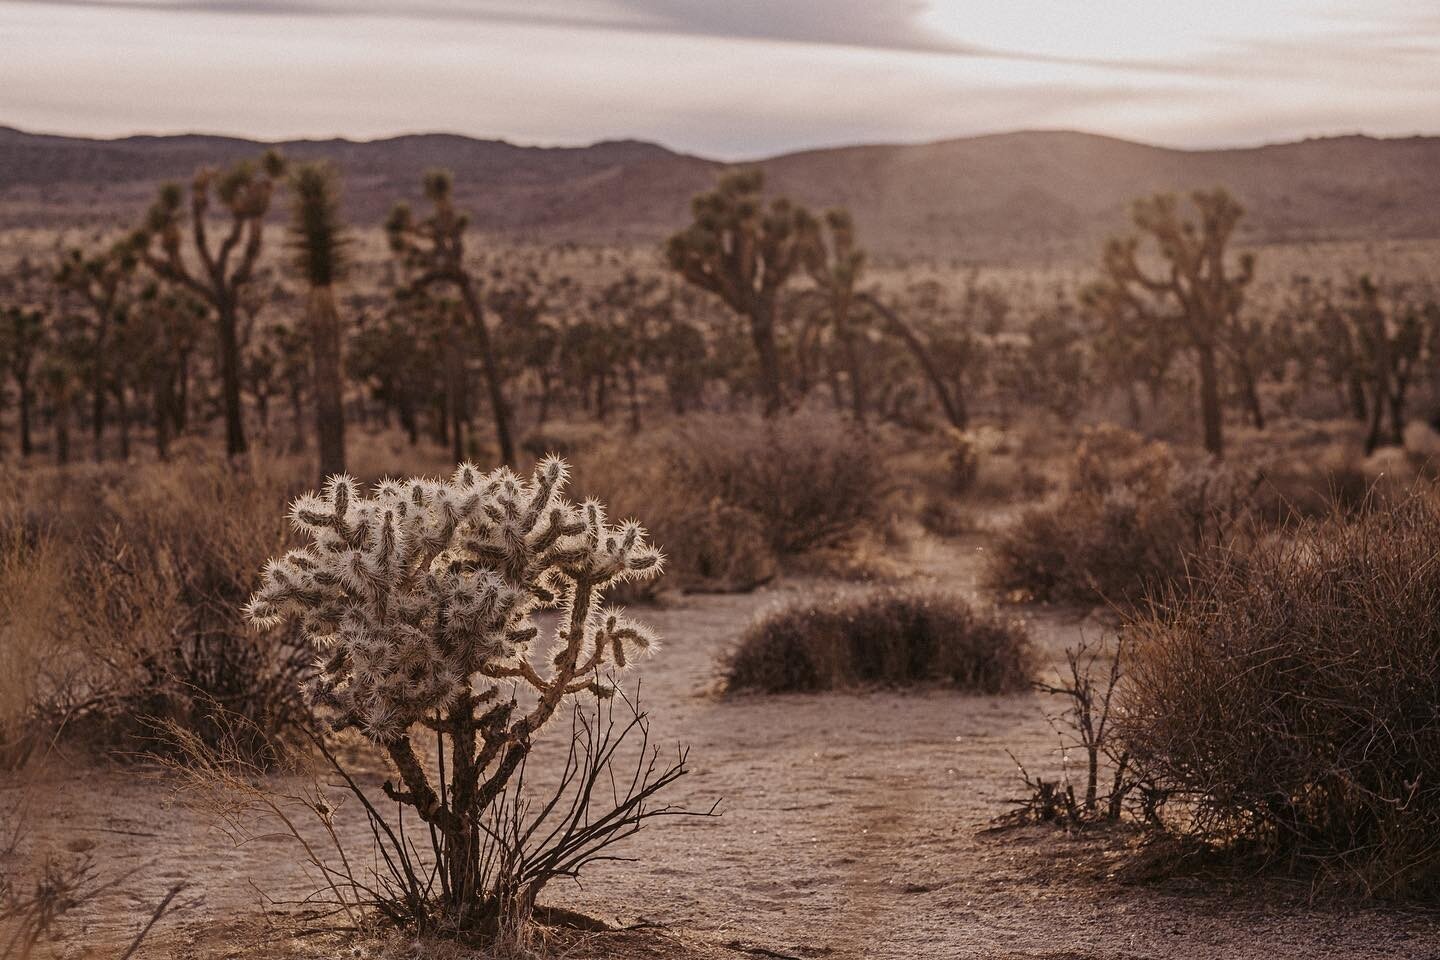 The months leading up to @thephotorehab I had my work computer&rsquo;s desktop photo as a picture of Joshua Tree so I could look at it whenever work was stressing me out too much. I kept it as a reminder that things were going to get better. And thin